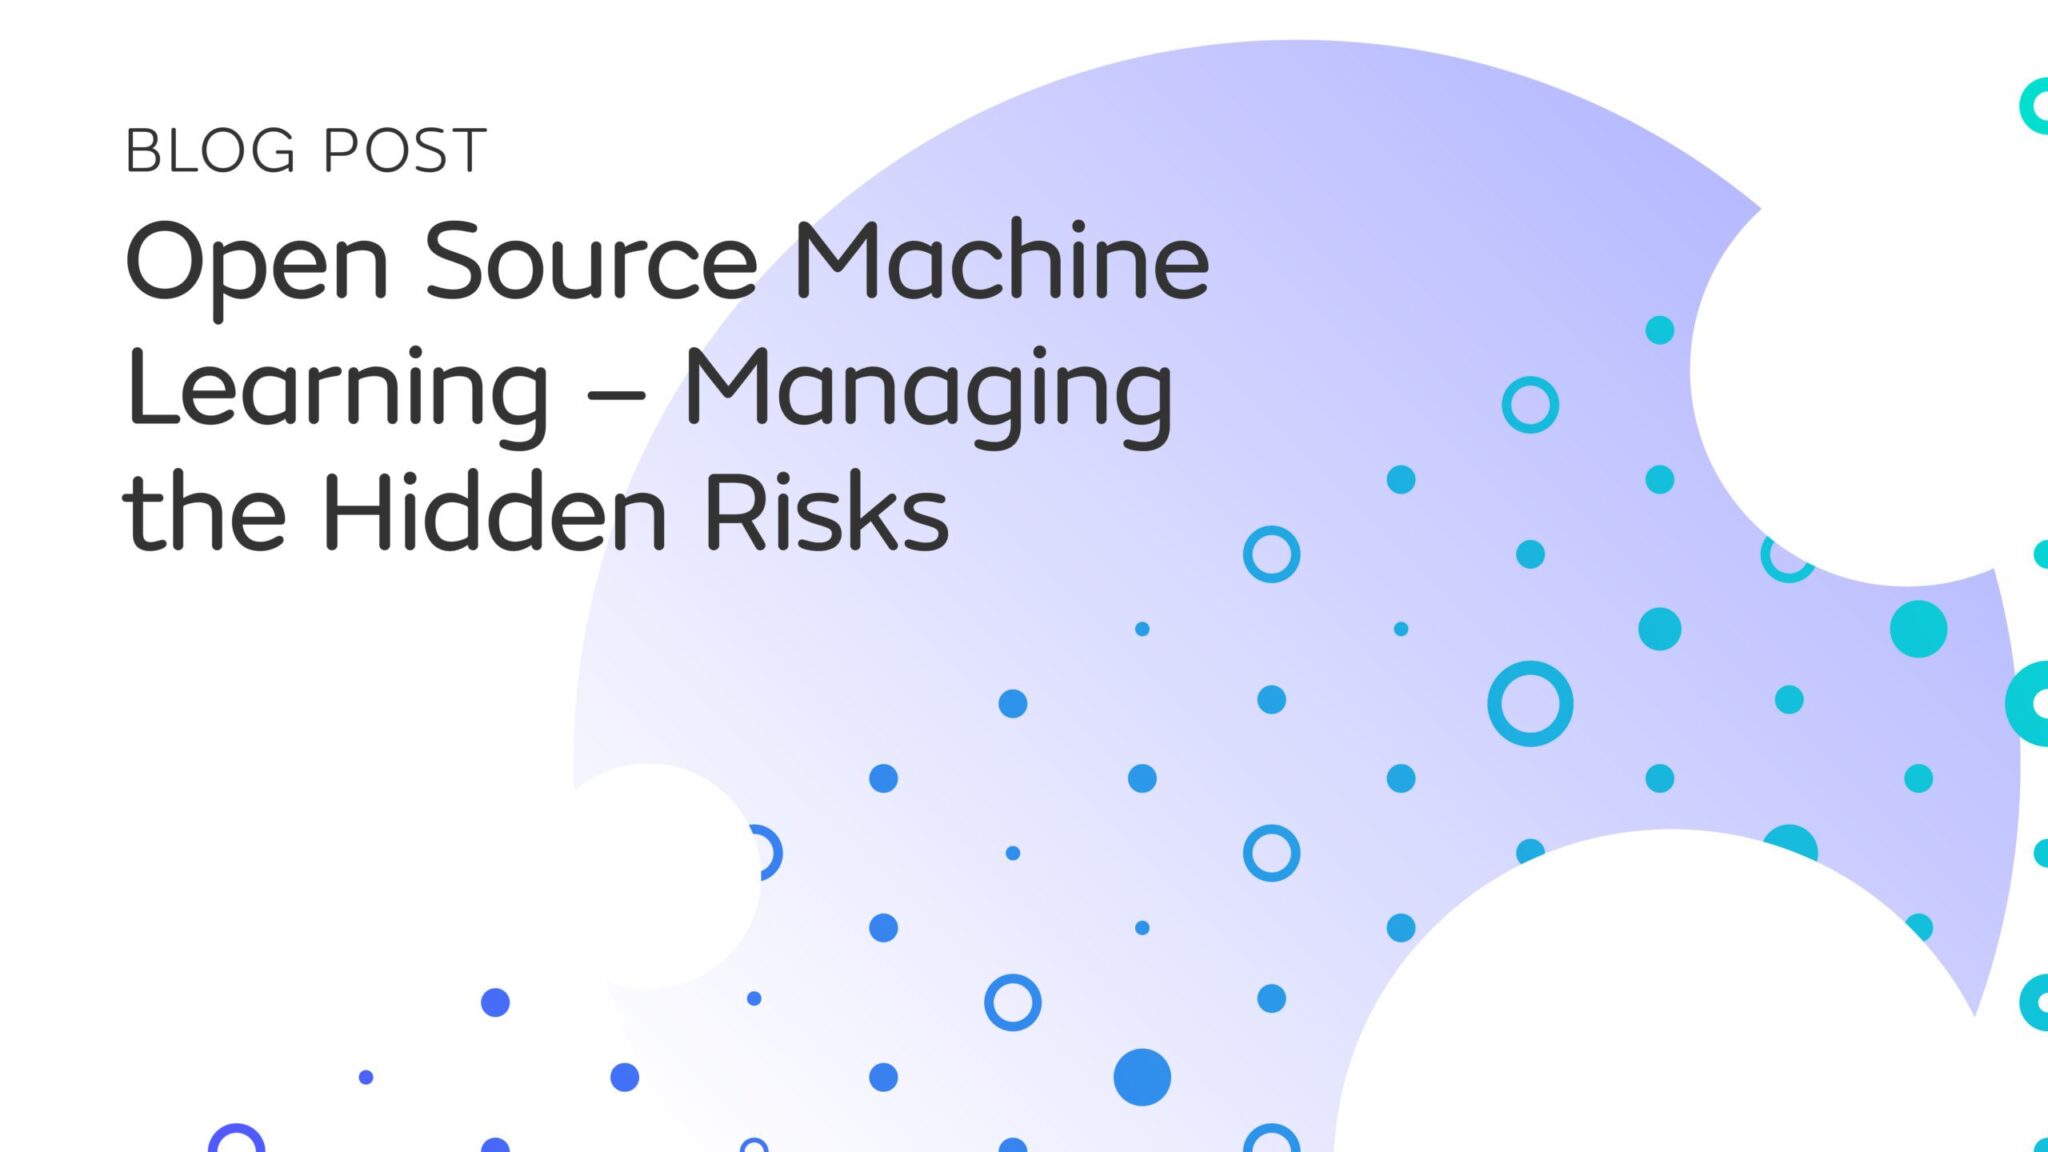 Open Source Machine Learning – Managing the Hidden Risks